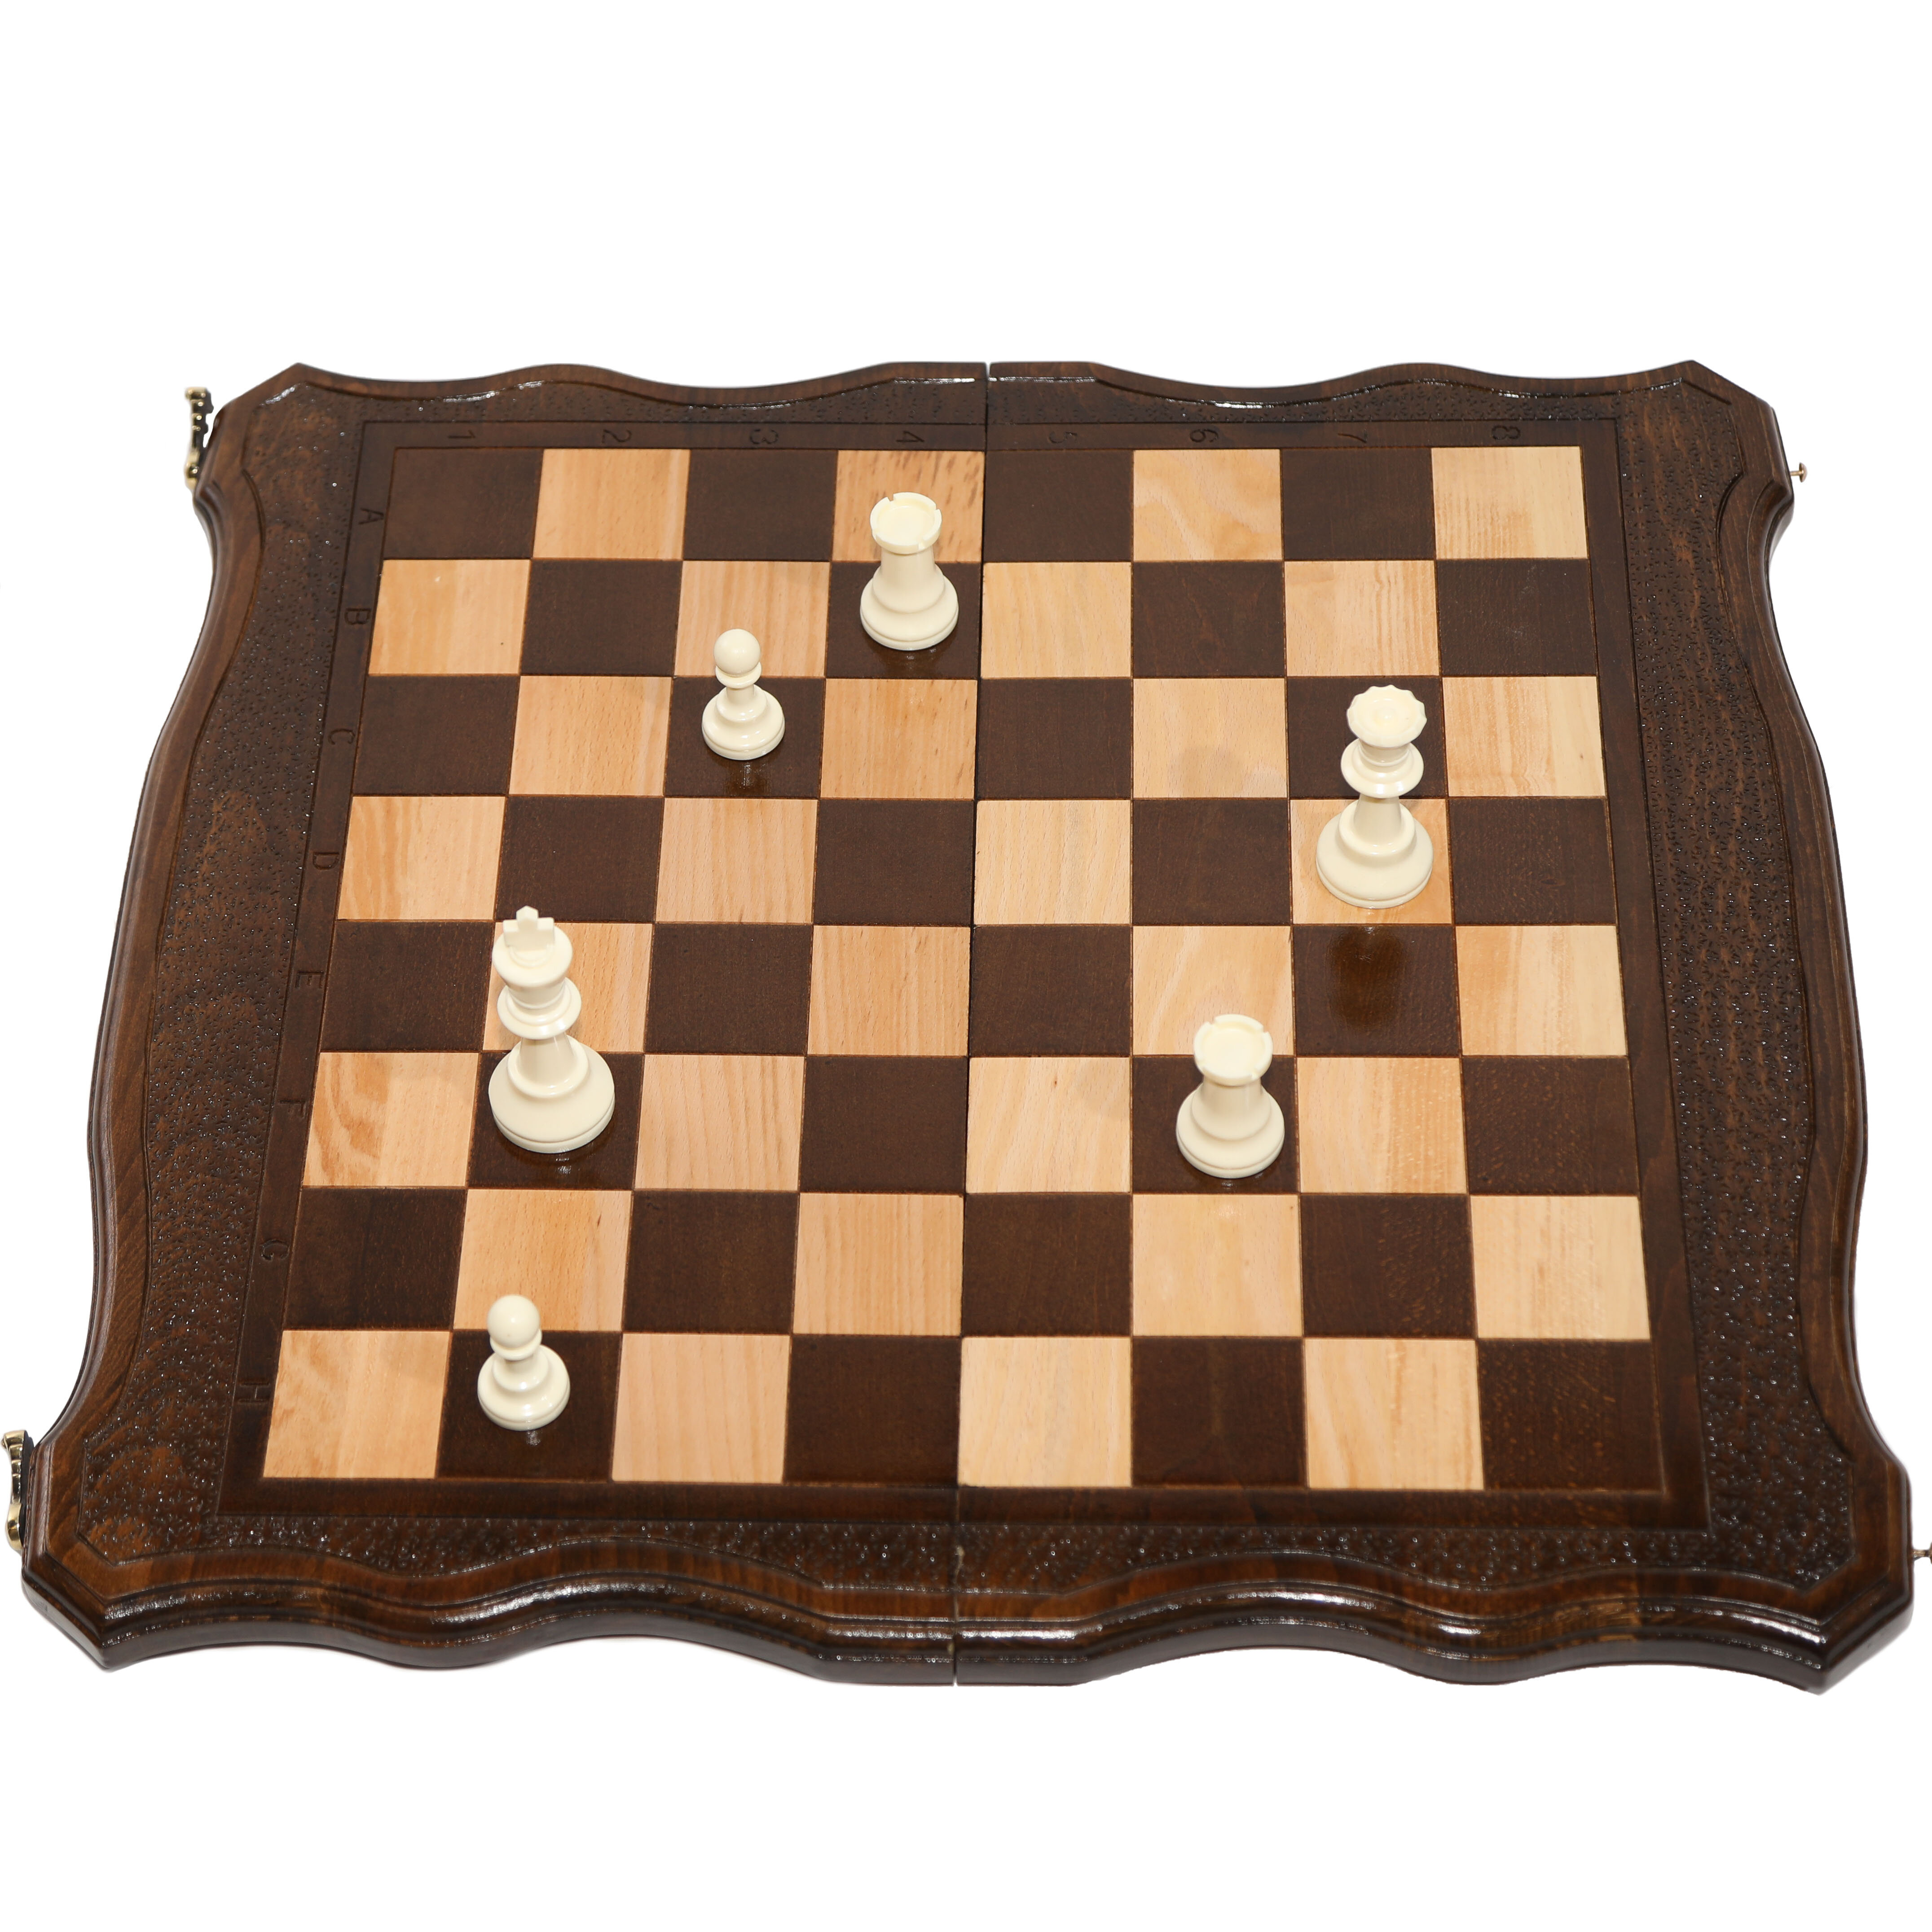 Chess, Classic Games, AreYouGame